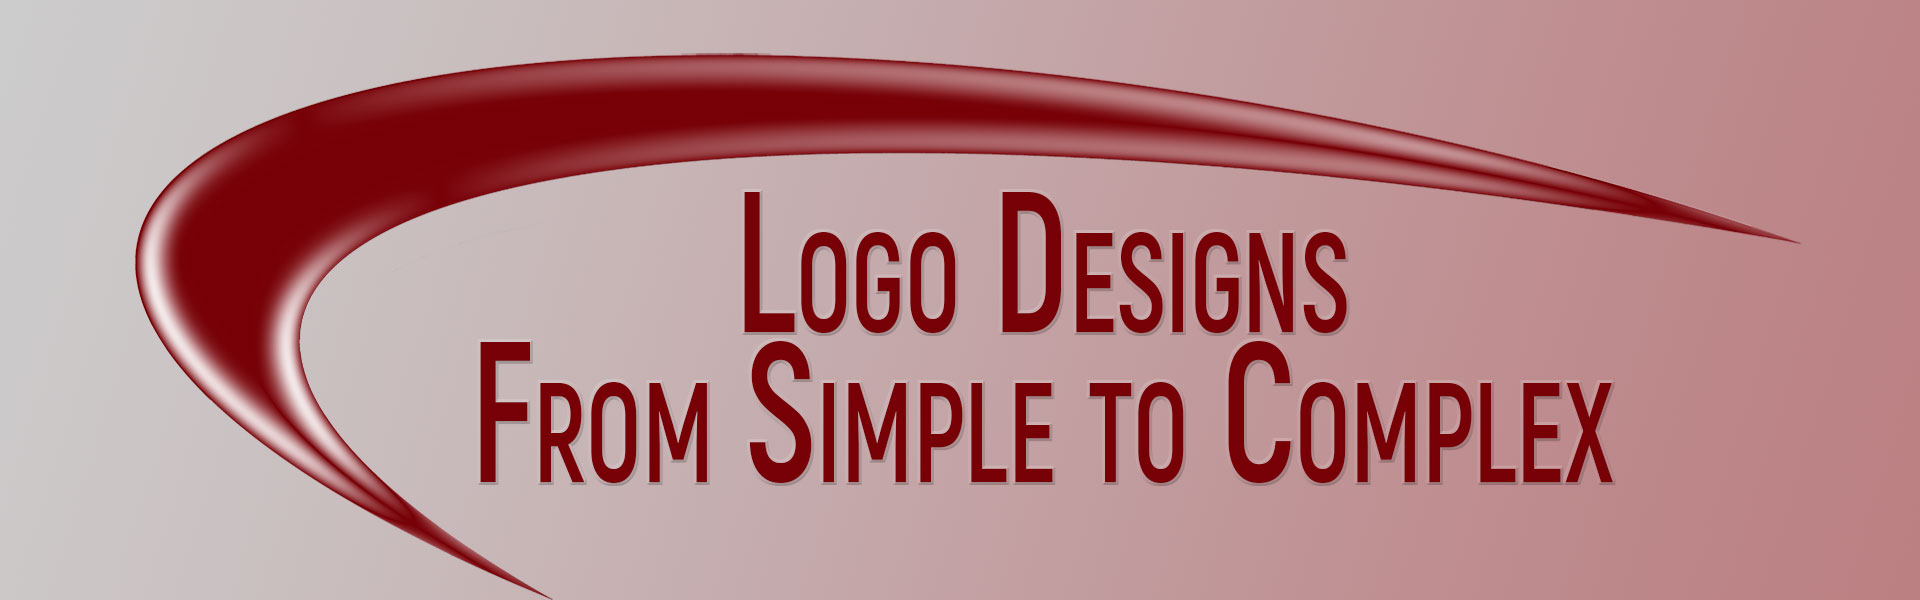 Affordable Web Design Ltd - our one-stop-shop includes logos and other graphics.